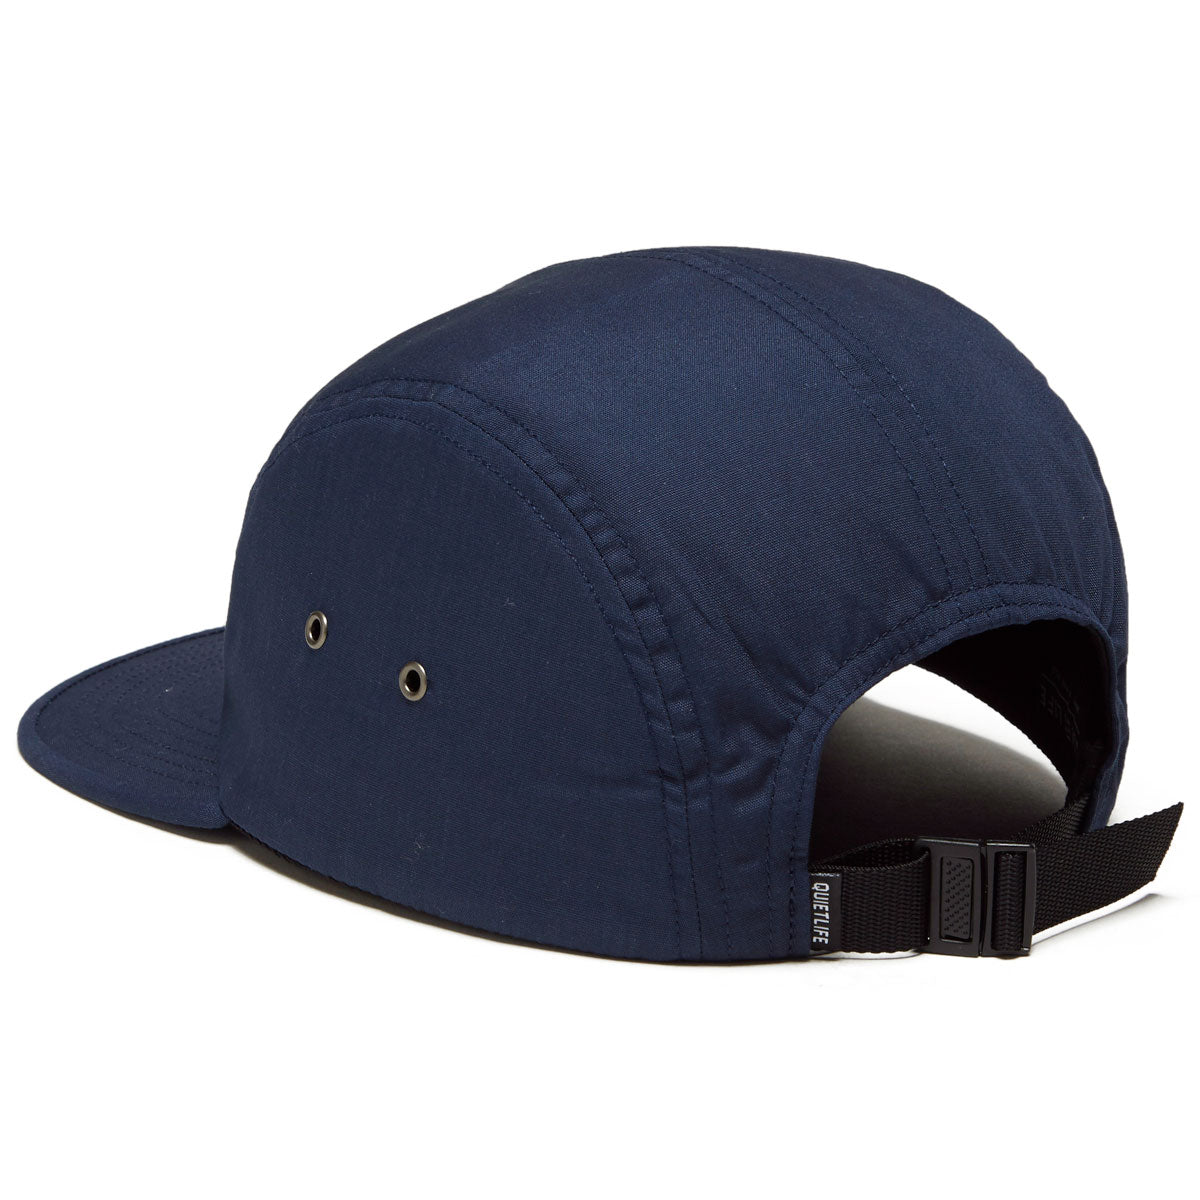 The Quiet Life Foundation 5 Panel Camper Hat - Navy image 2